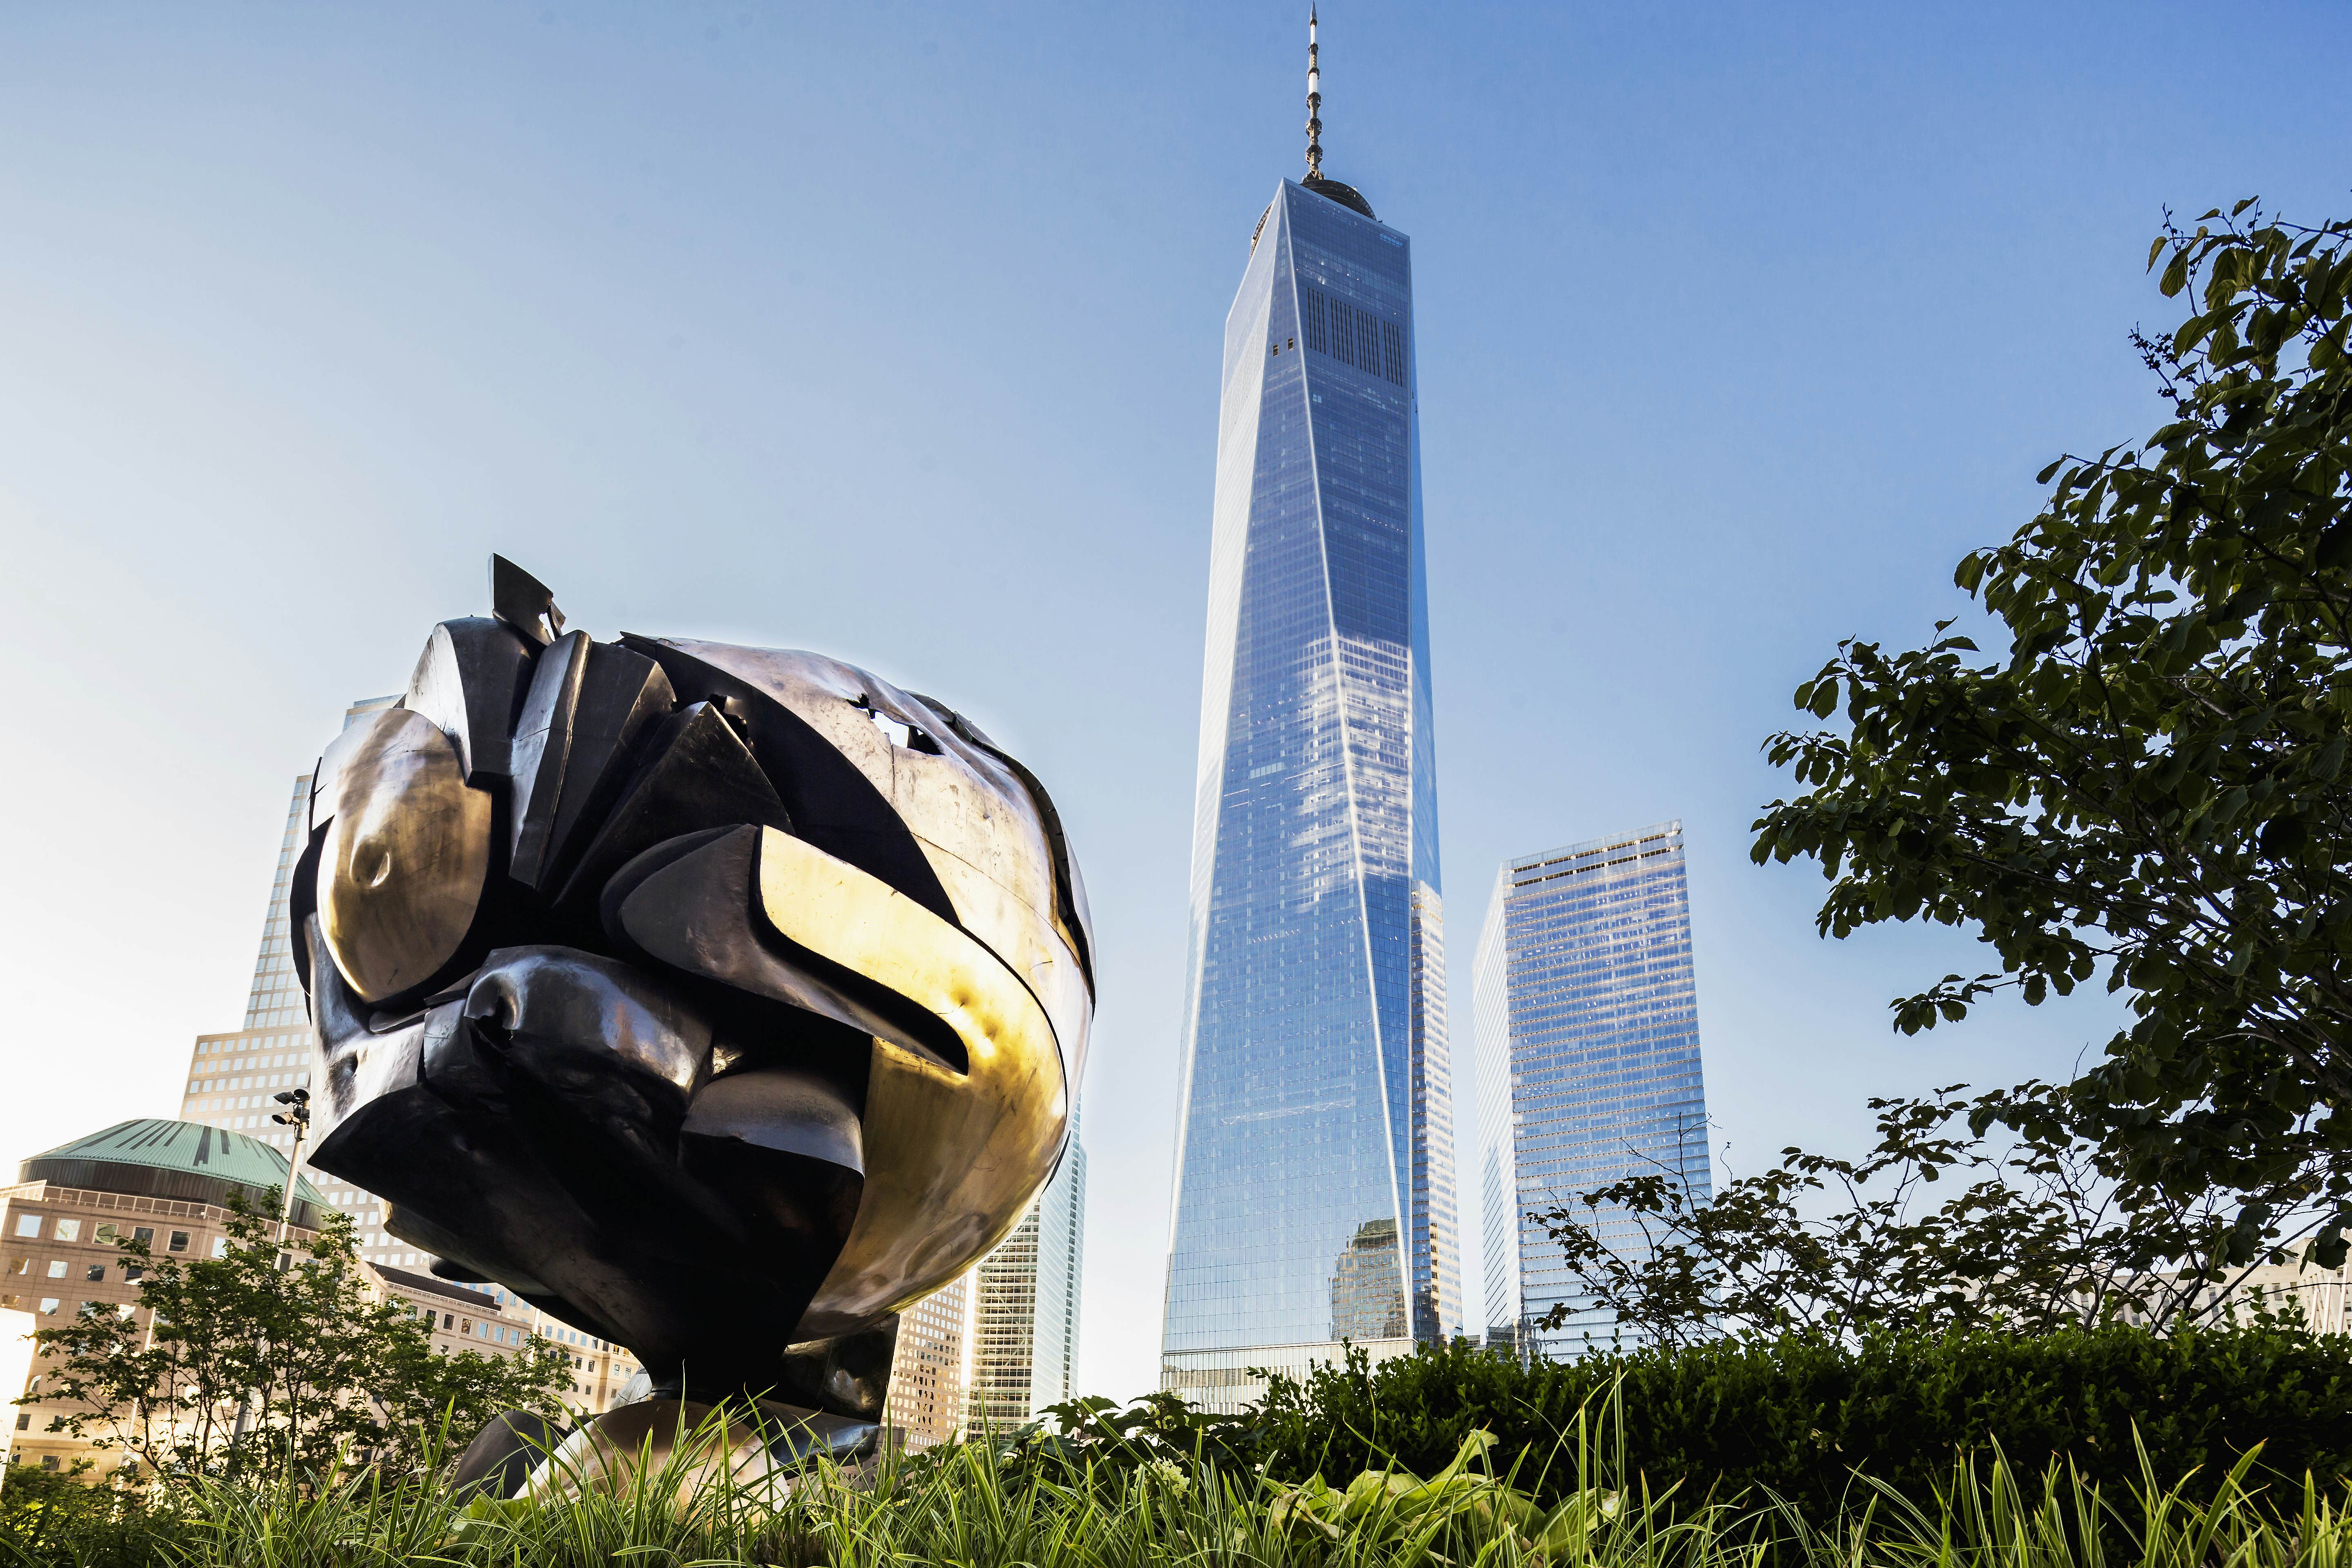 From the Twin Towers to One World Trade Center, 20 years on